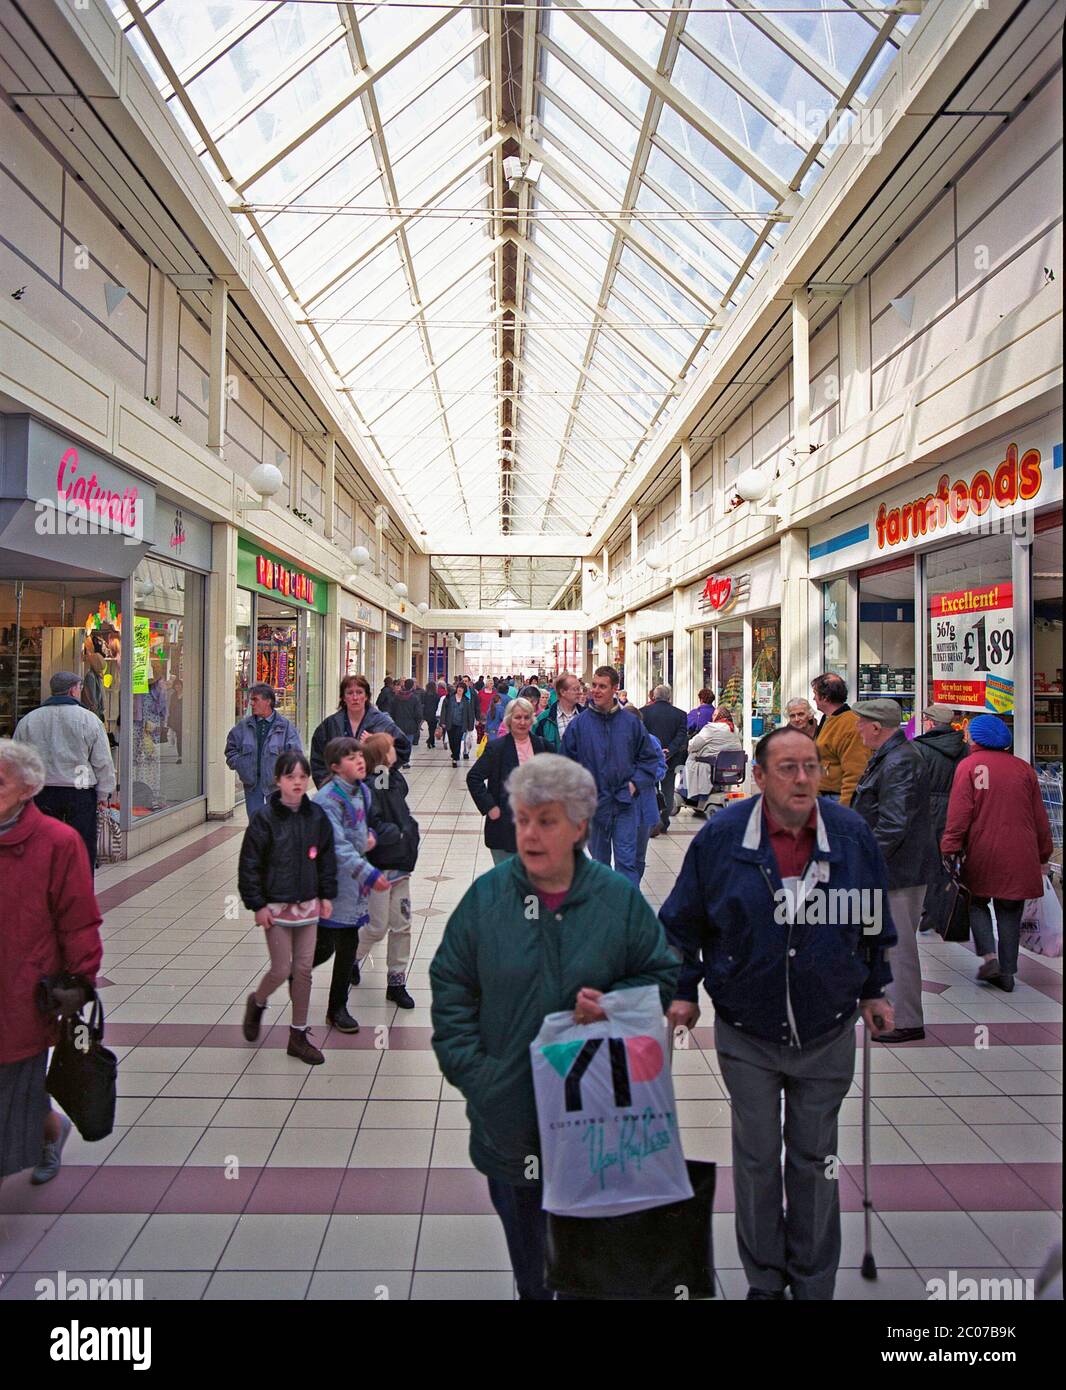 1996, The Spinning Gate Shopping Centre, Leigh, Lancashire, North West England, UK Stock Photo